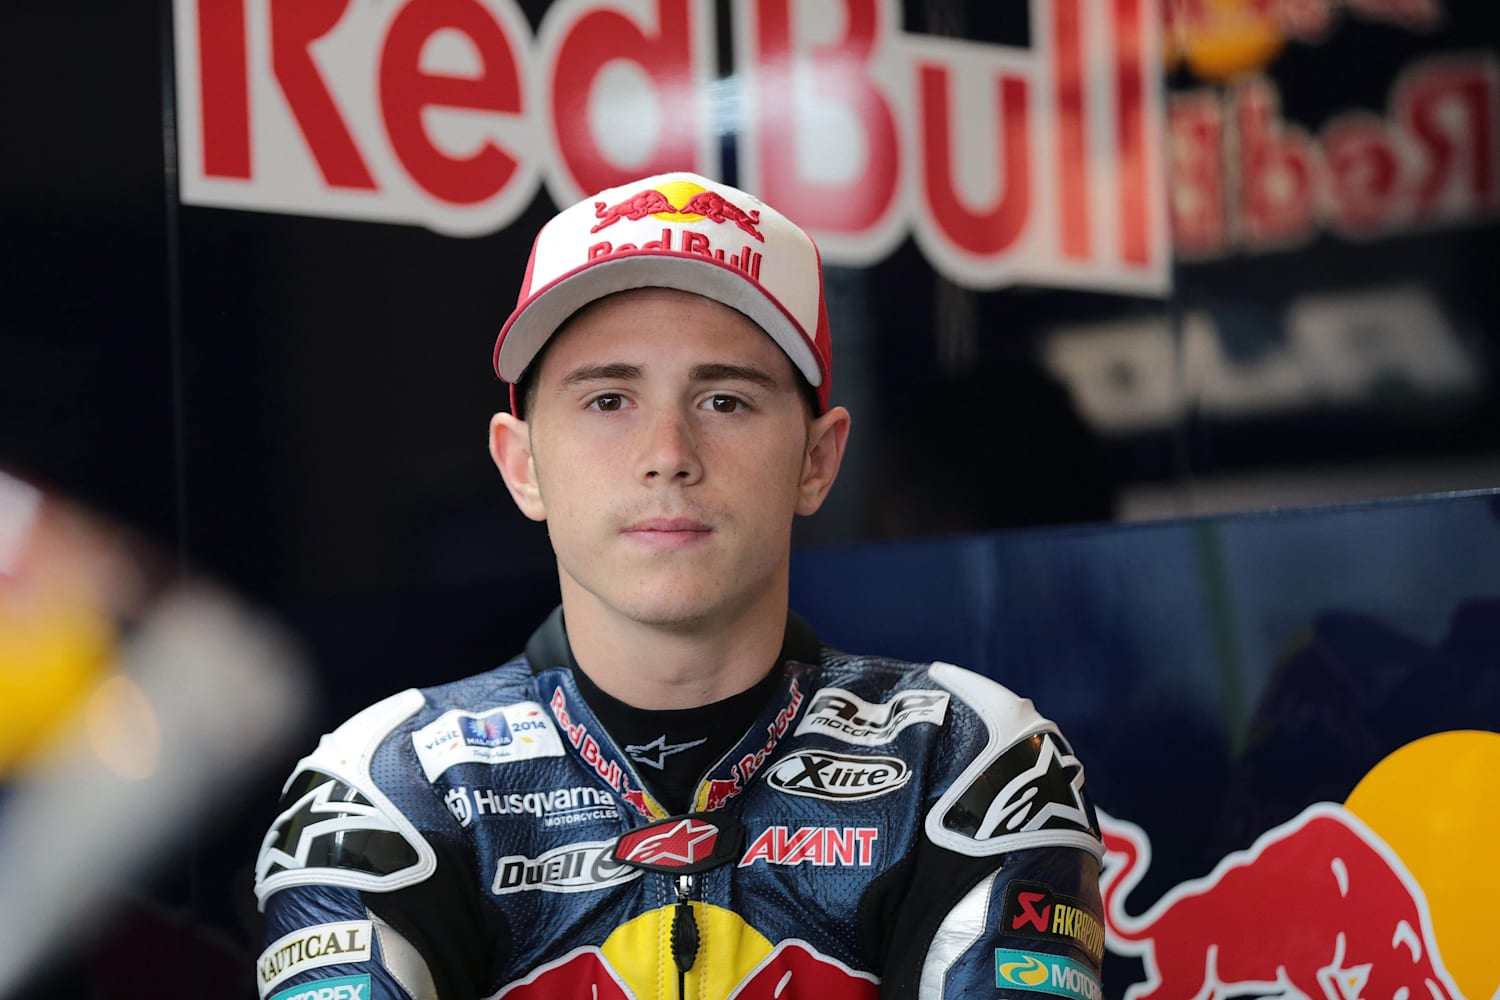 Moto3 rider Danny Kent tips for training like a pro